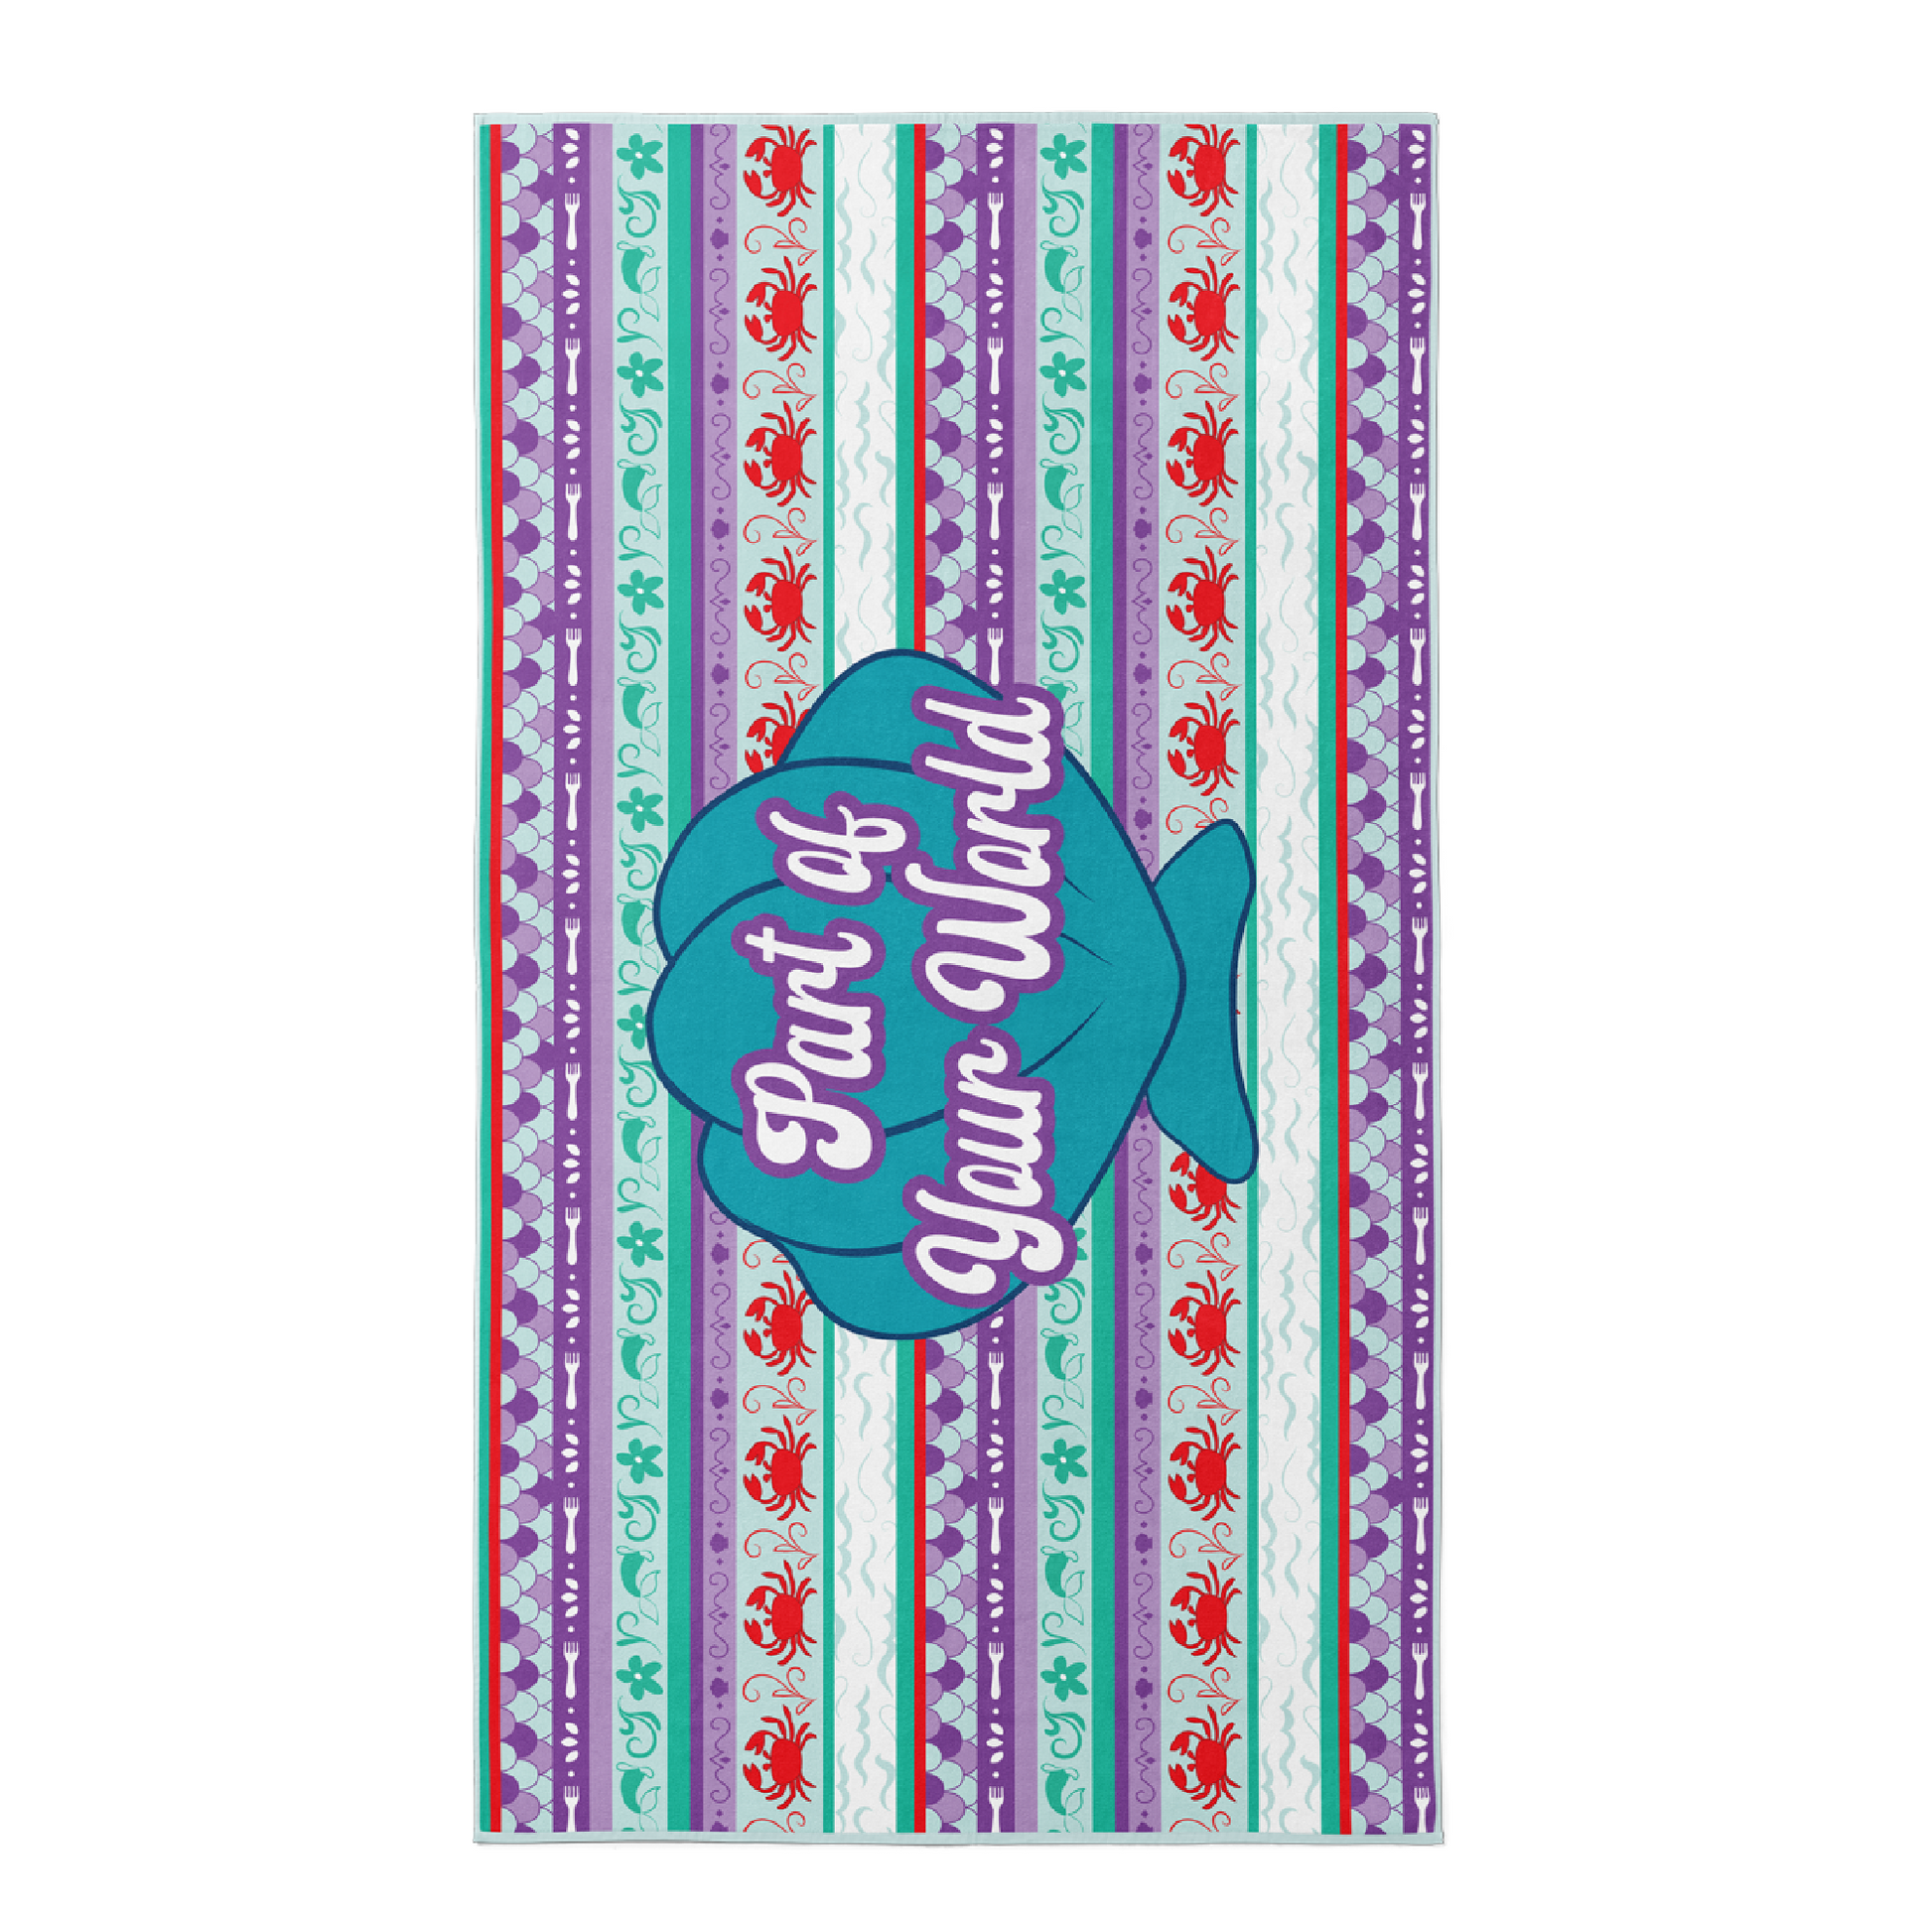 Beach towel in aqua, purple, and red princess stripe with Seashell and Text "Part of your world".